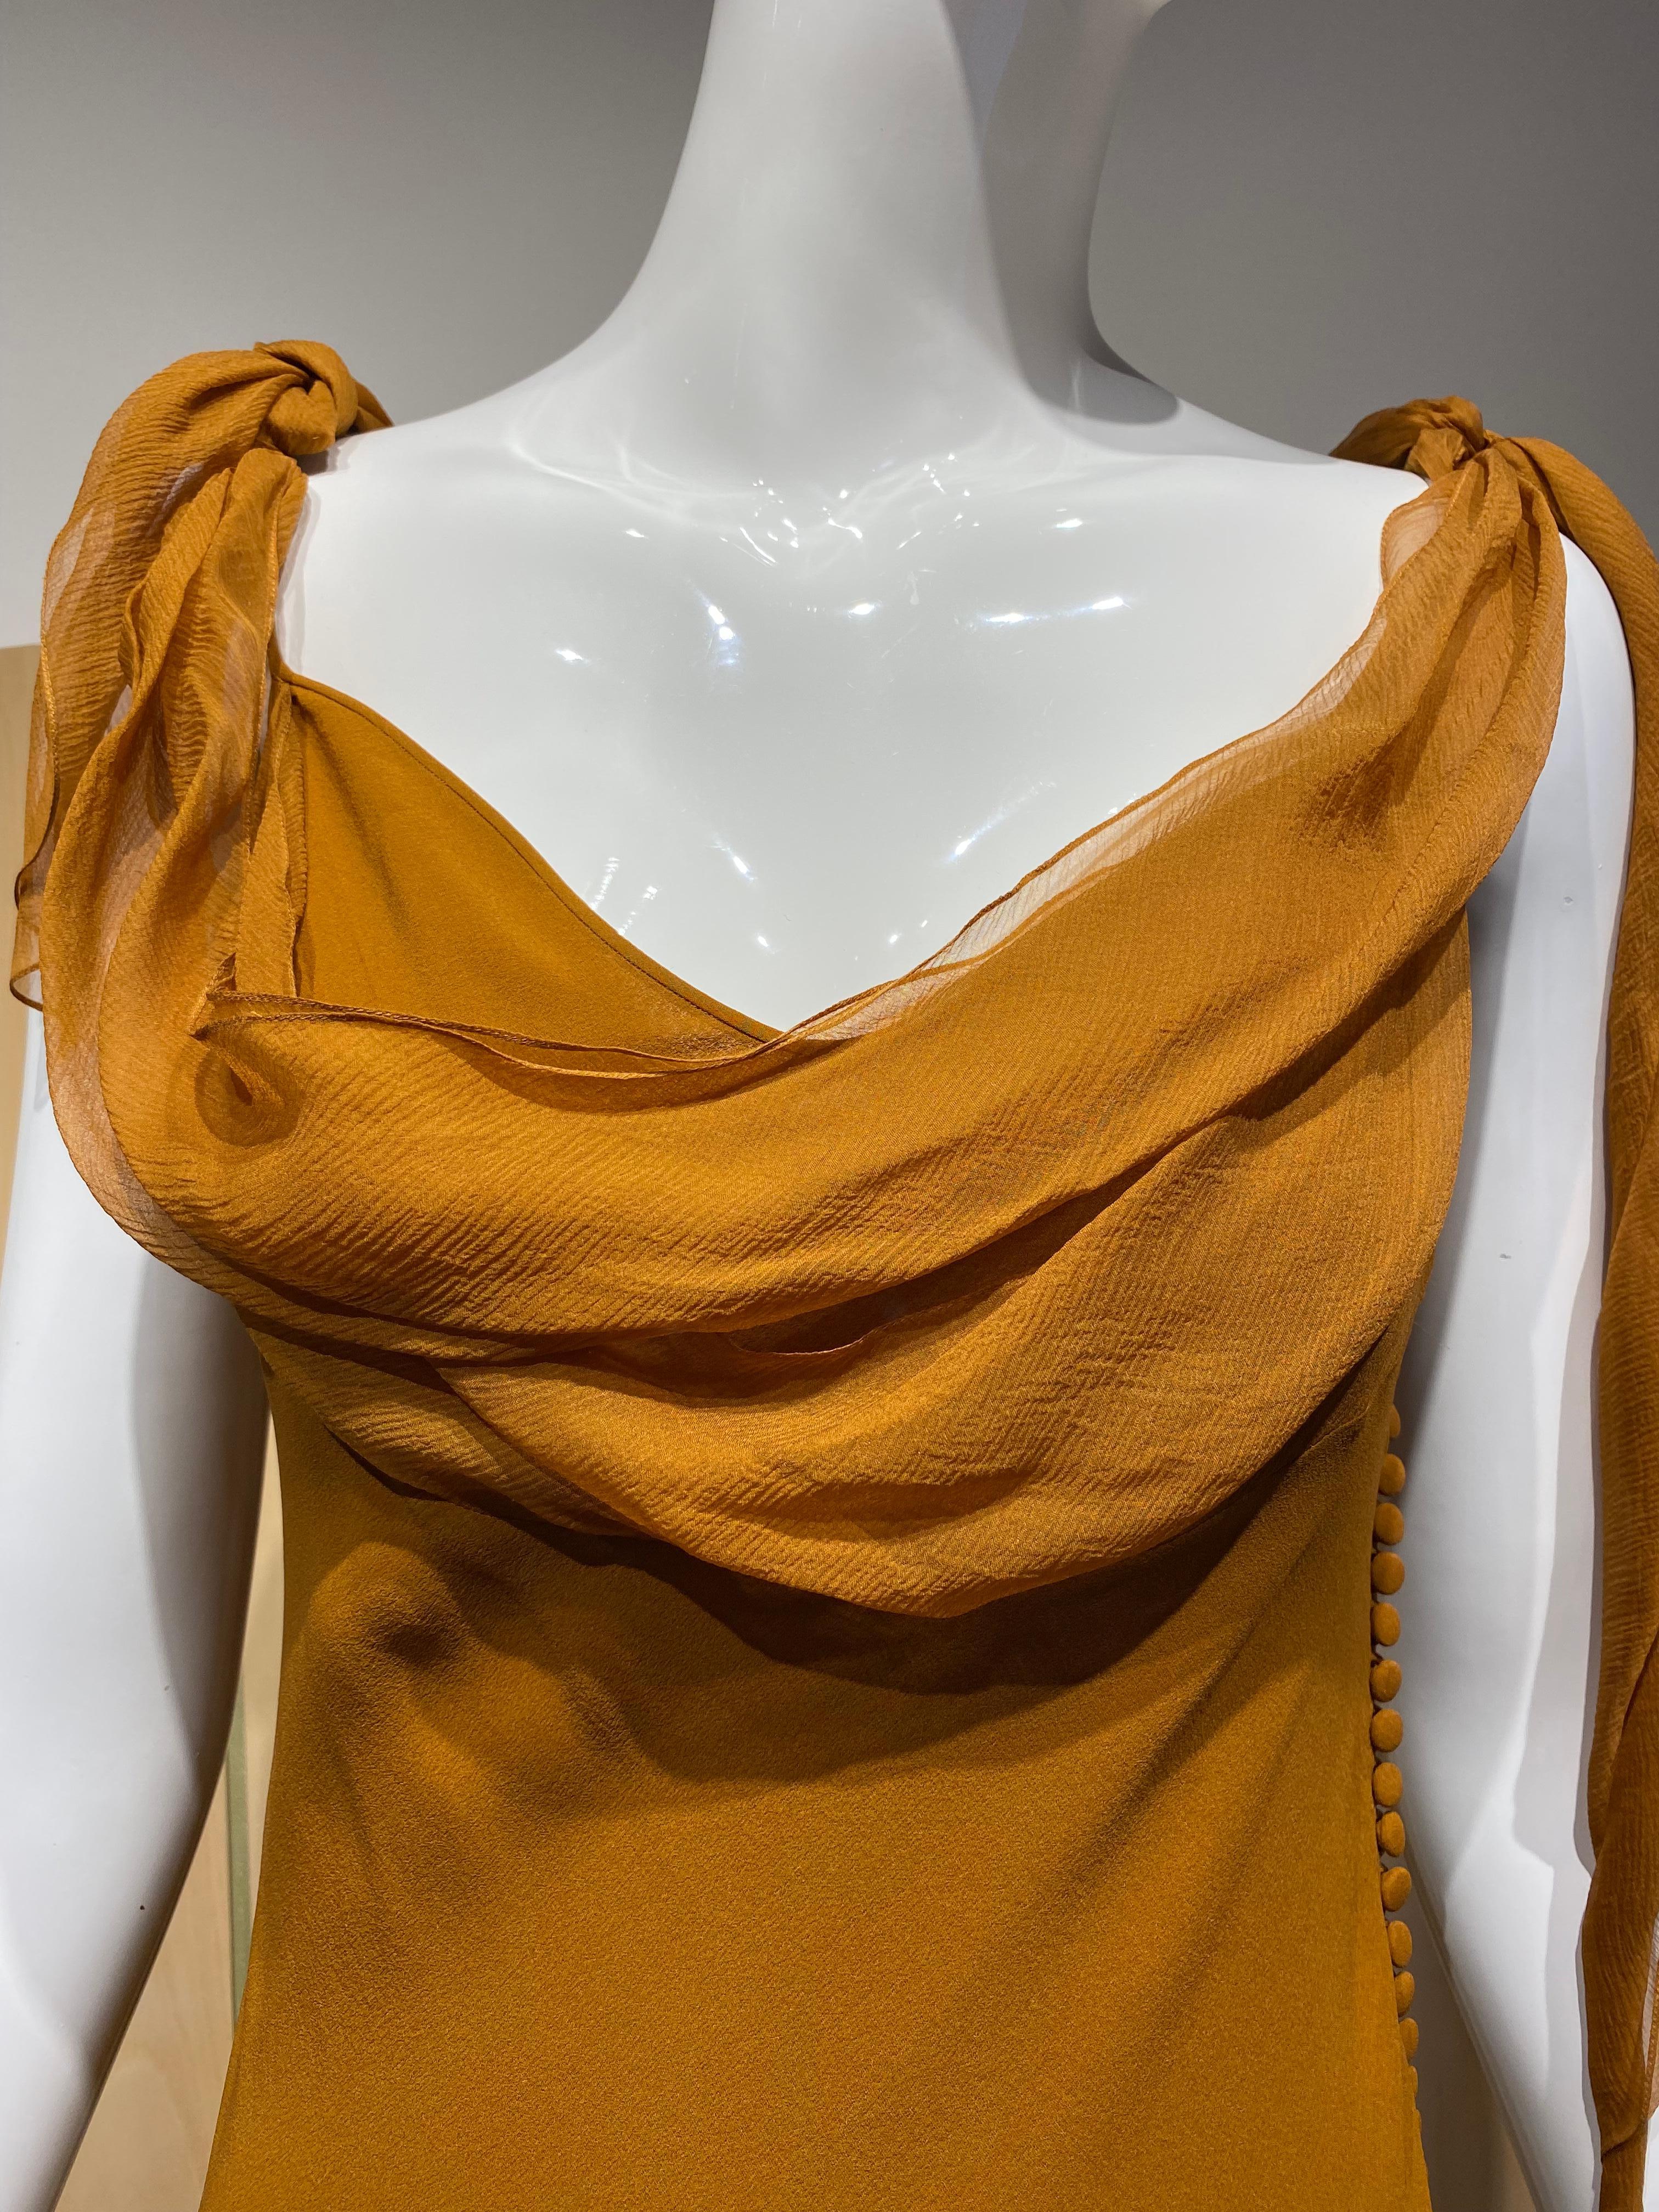 Vintage John Galliano Silk Chiffon Bias Cut gown in beautiful amber color. 
Size fit size 2/4/6/8 ( see measurement below)
Mannequin is size 2

Bust : 34-36” waist : 34-36 “/ hip 39”/ dress length : 60”